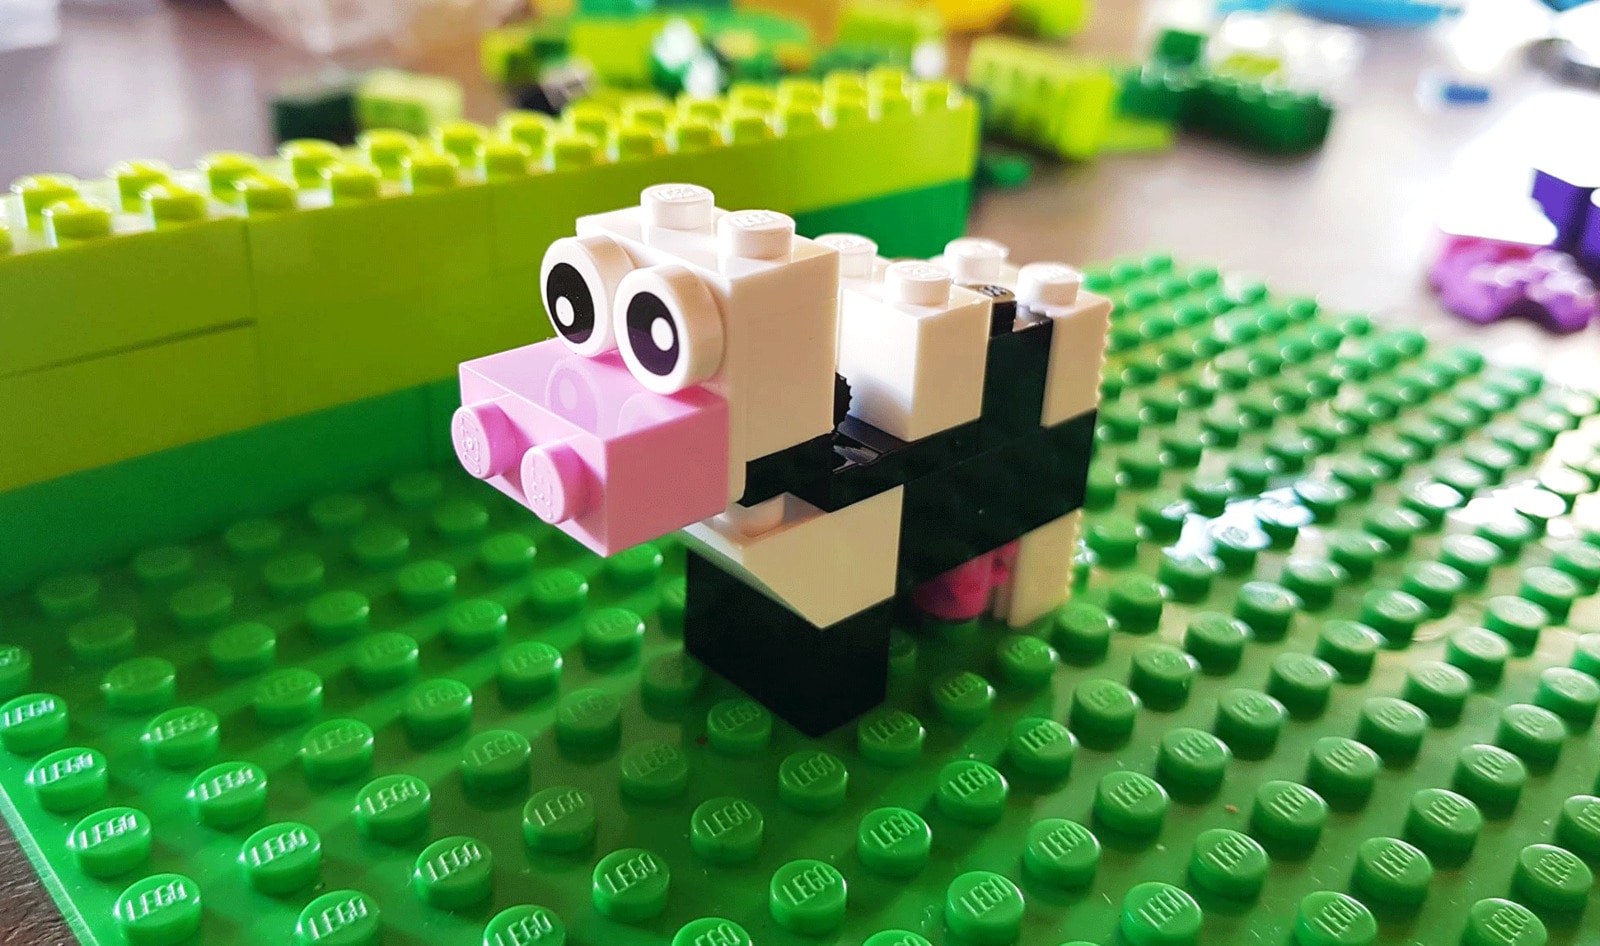 Researchers Use Legos to Help Make Lab-Grown Meat